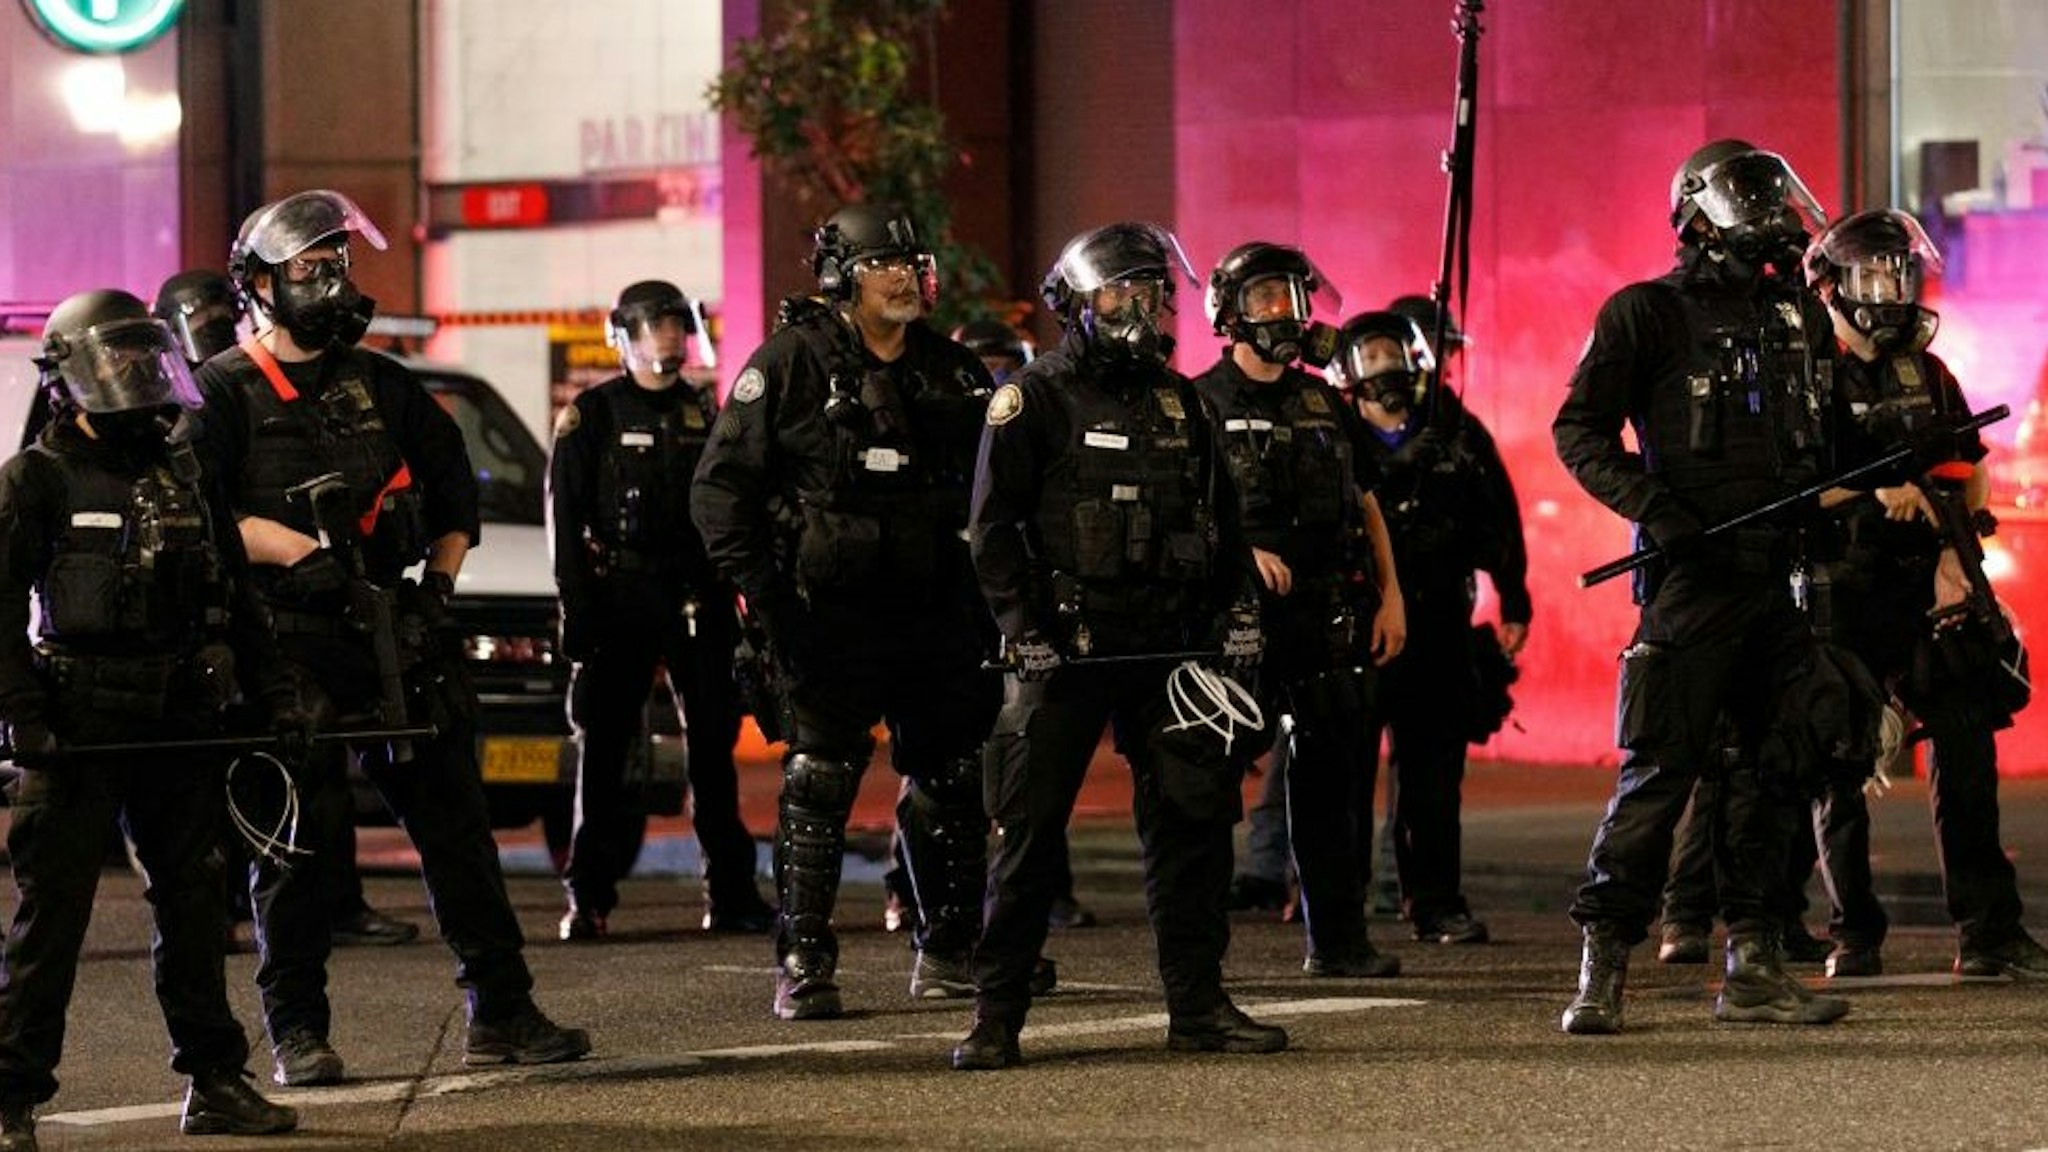 Police confront demonstrators as Black Lives Matter supporters demonstrate in Portland, Oregon on July 4, 2020 for the thirty-eighth day in a row at Portland's Justice Center and throughout Portland, with a riot declared about 12.20 am on July 5. CS tear gas and less-lethal weapons were used, and multiple arrests were made. (Photo by